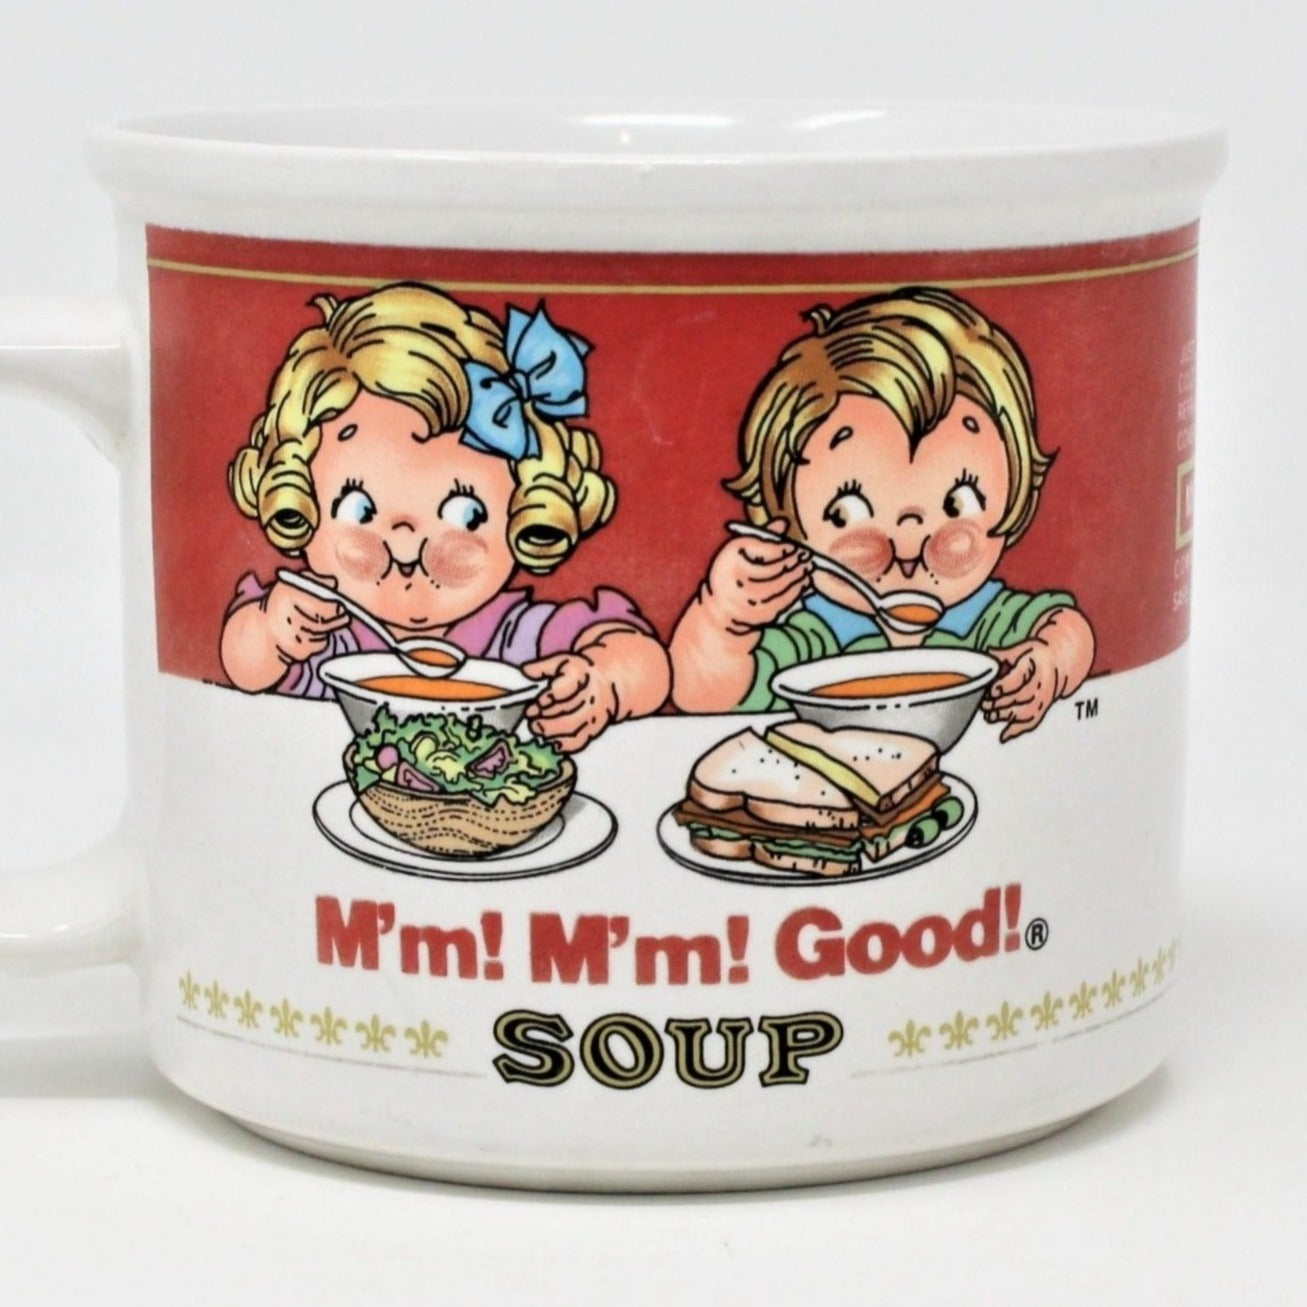 Campbell Soup Company, Dining, Campbells Soup Kids Mugs